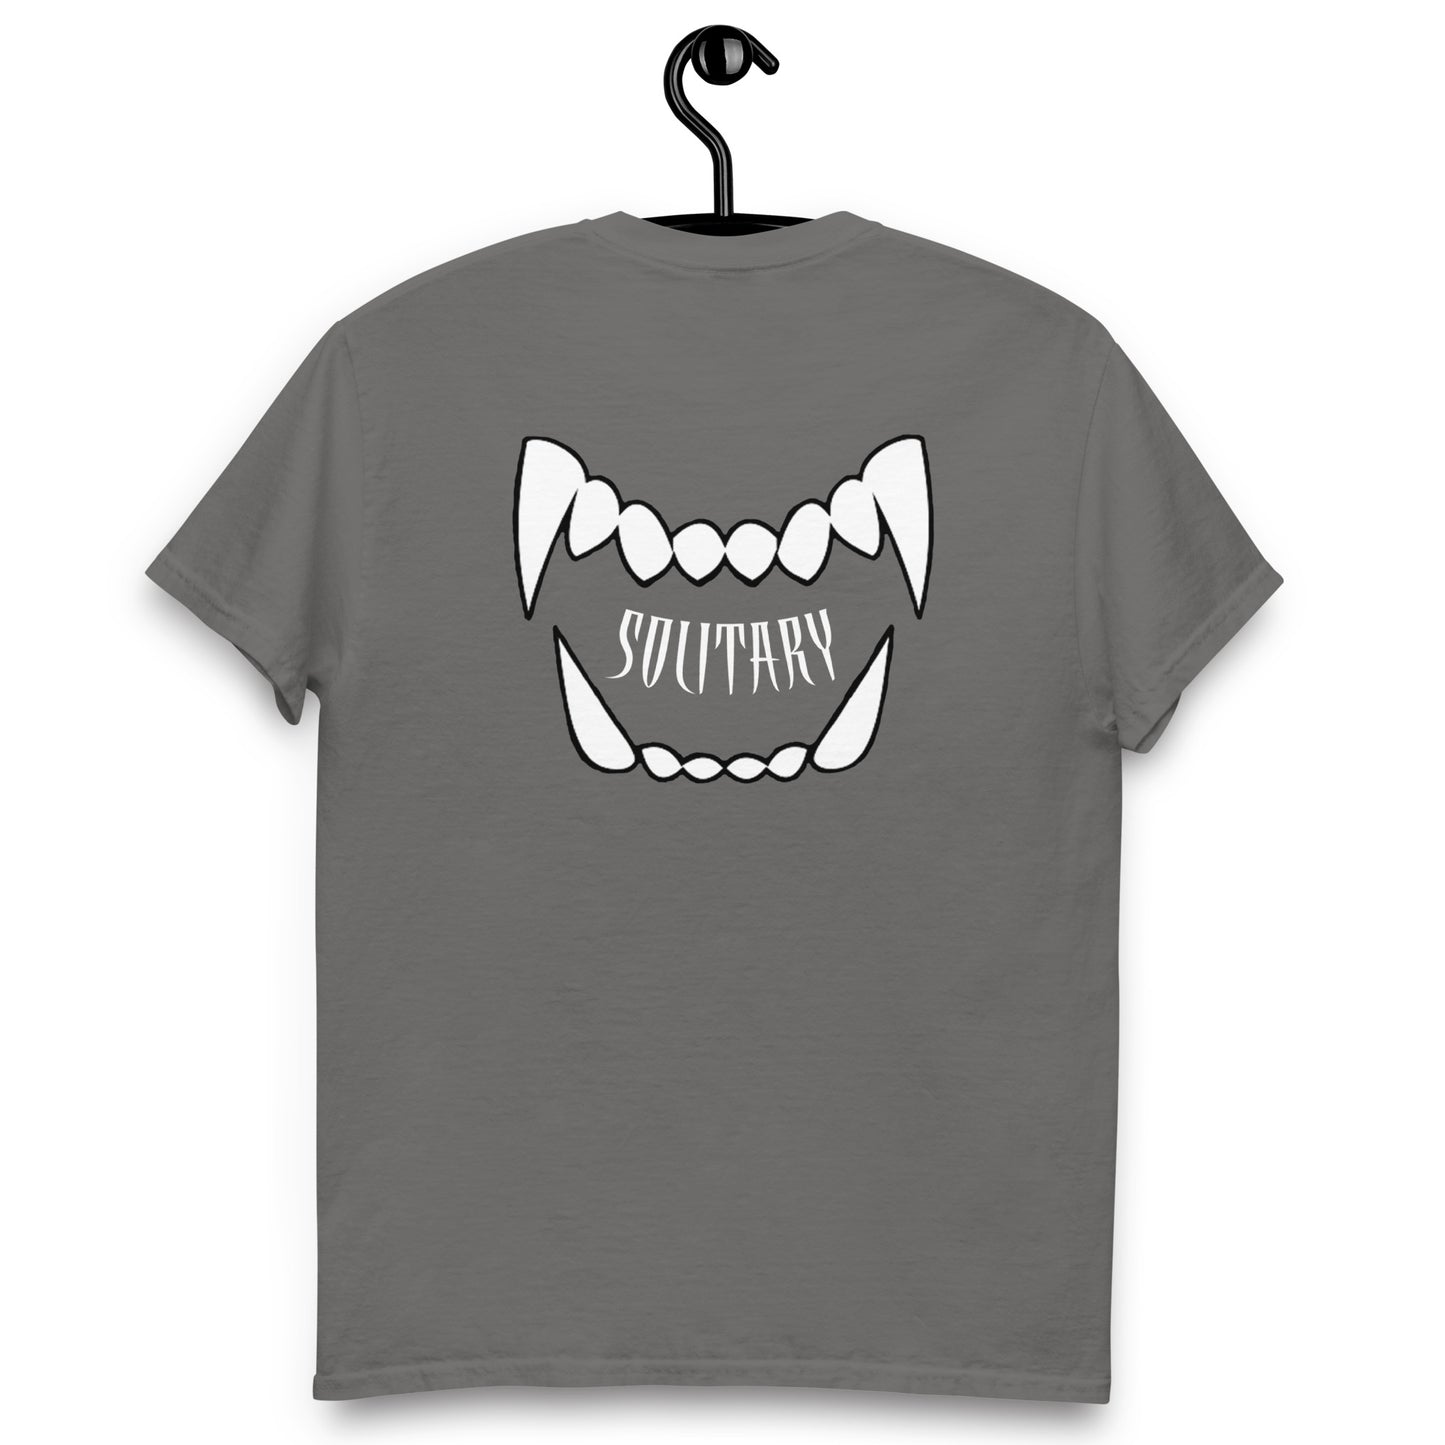 Fangs Embroidered Solitary t-shirt